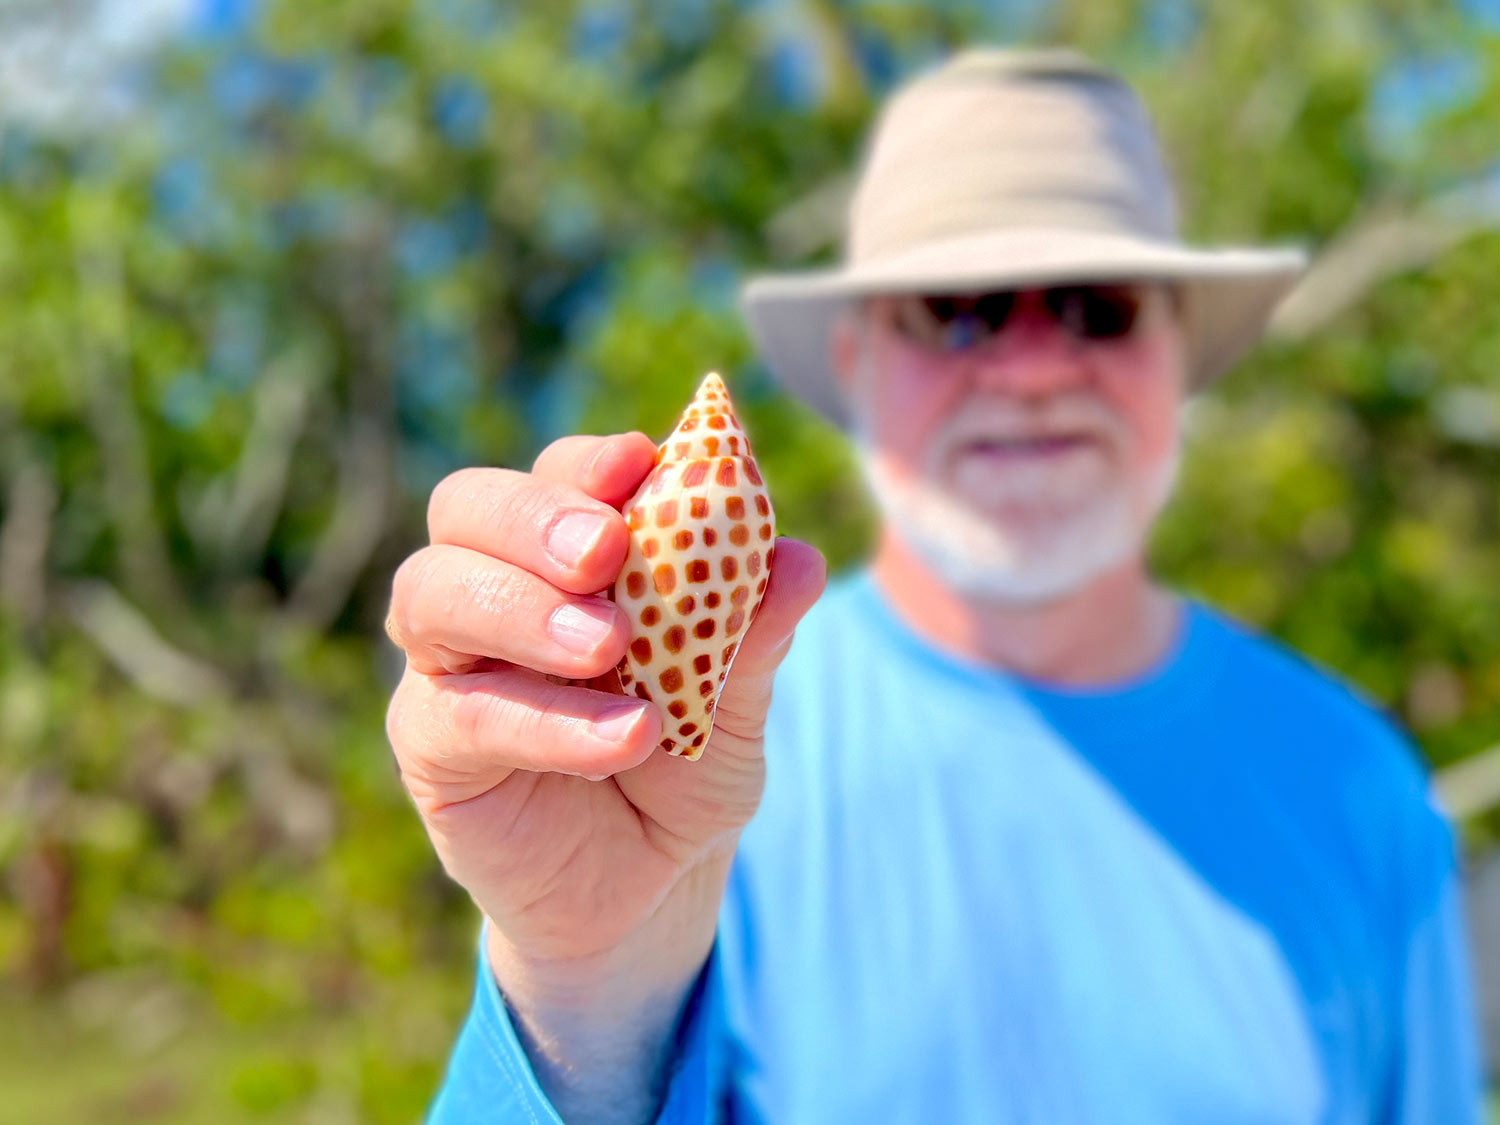 Junonia Shell discovered on an Everwater Charters & Tours Shelling Tour of the Ten Thousand Islands, Florida